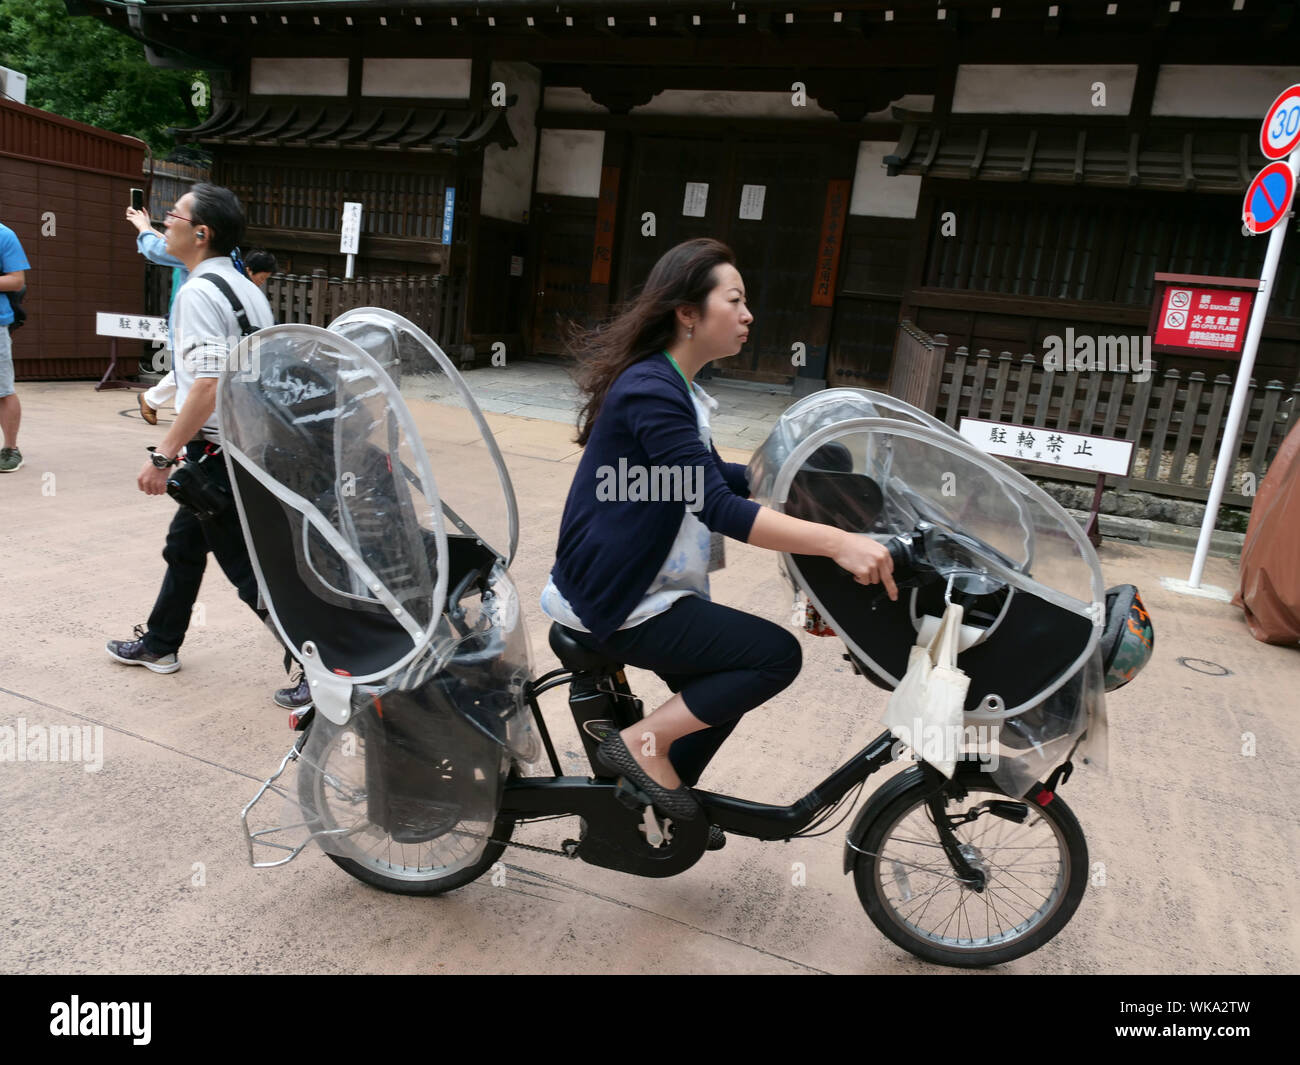 JAPAN - photo by Sean Sprague  Asakusa, Tokyo. Woman riding bicycle with seats for two young children. Stock Photo